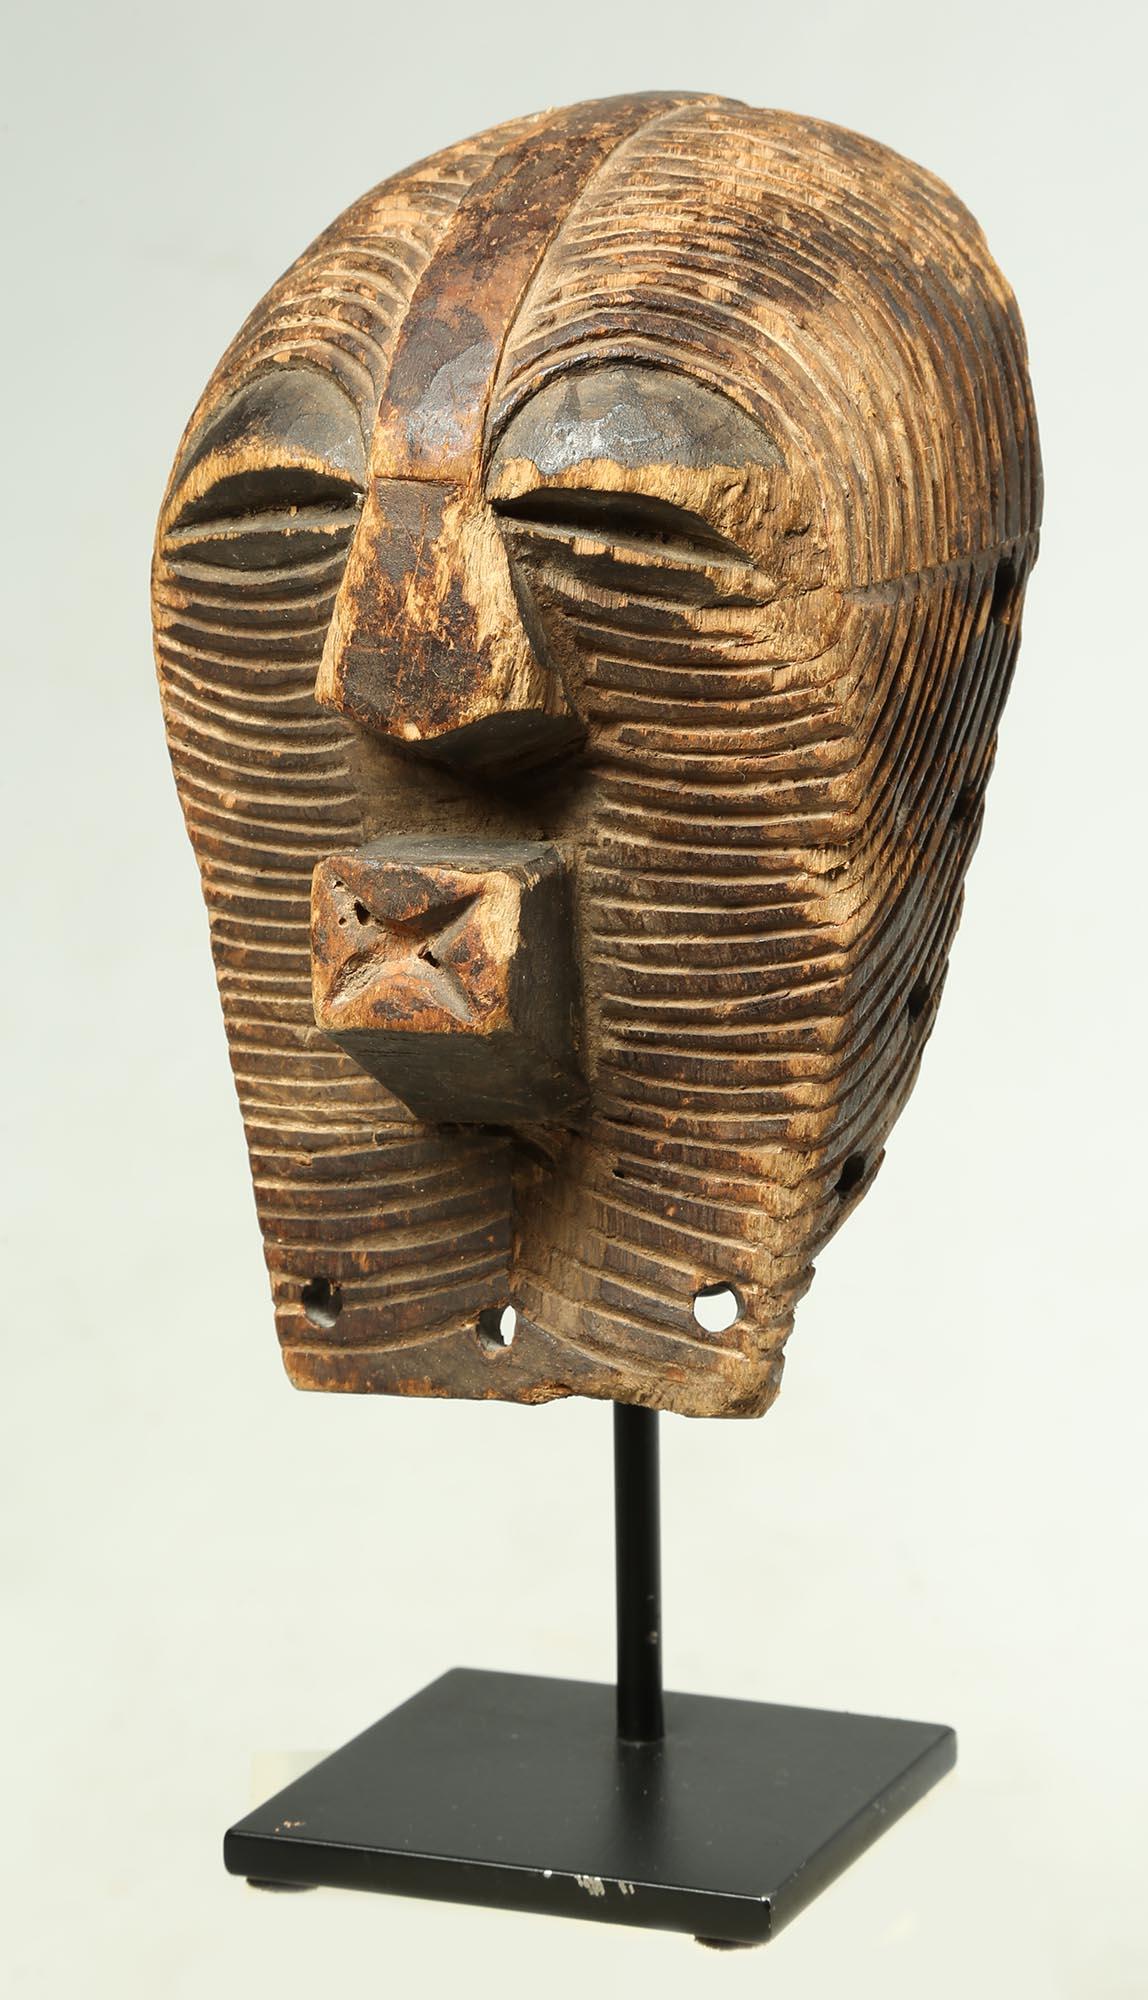 Tribal Old Worn Small Songye Kifwebe Mask with Fine Striations Around Face Cubist Mouth